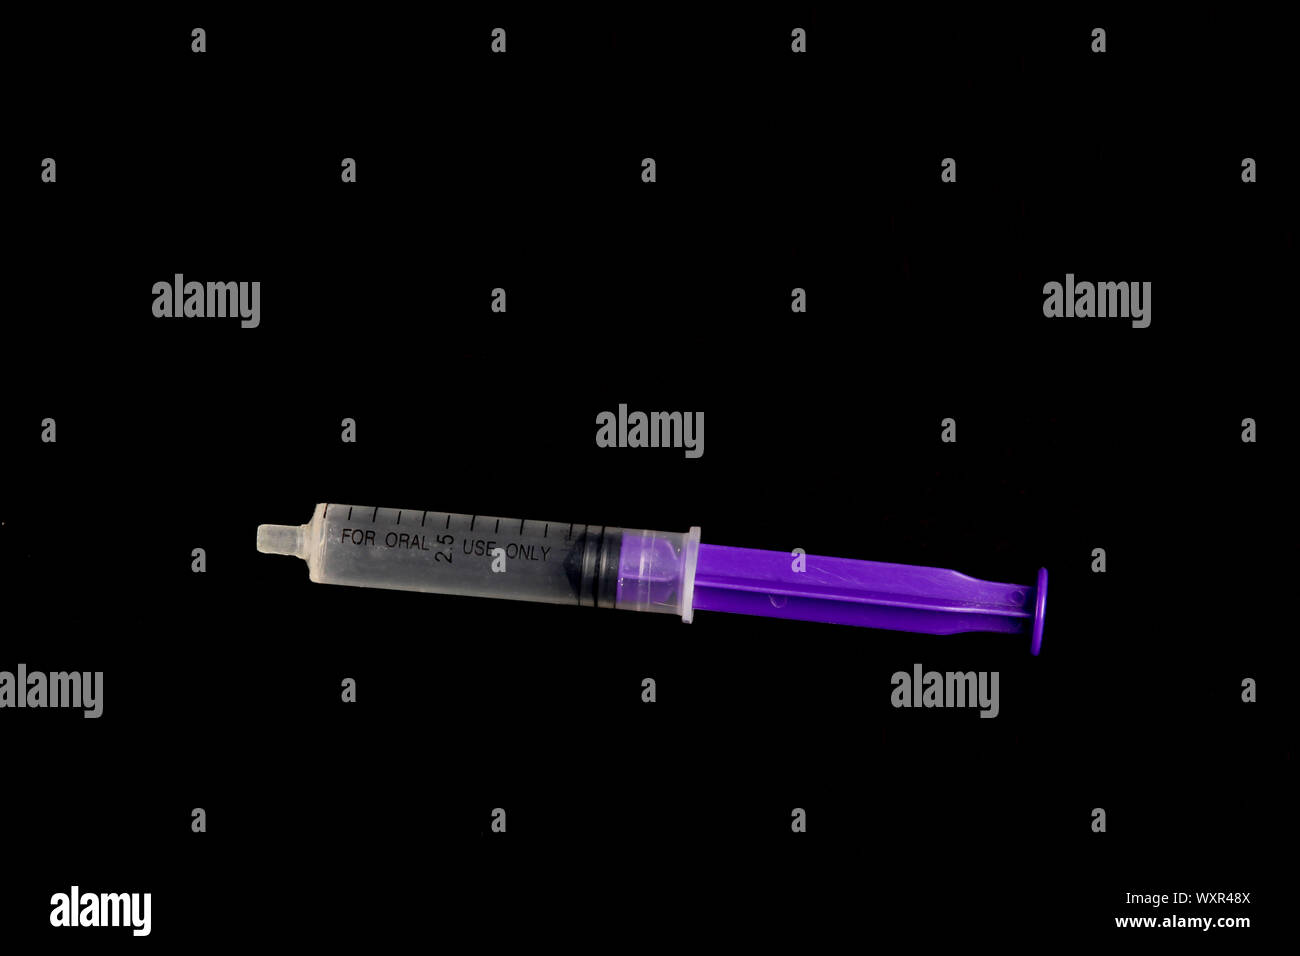 Medical dosage oral syringe for oral usage isolated on black background with copy space Stock Photo